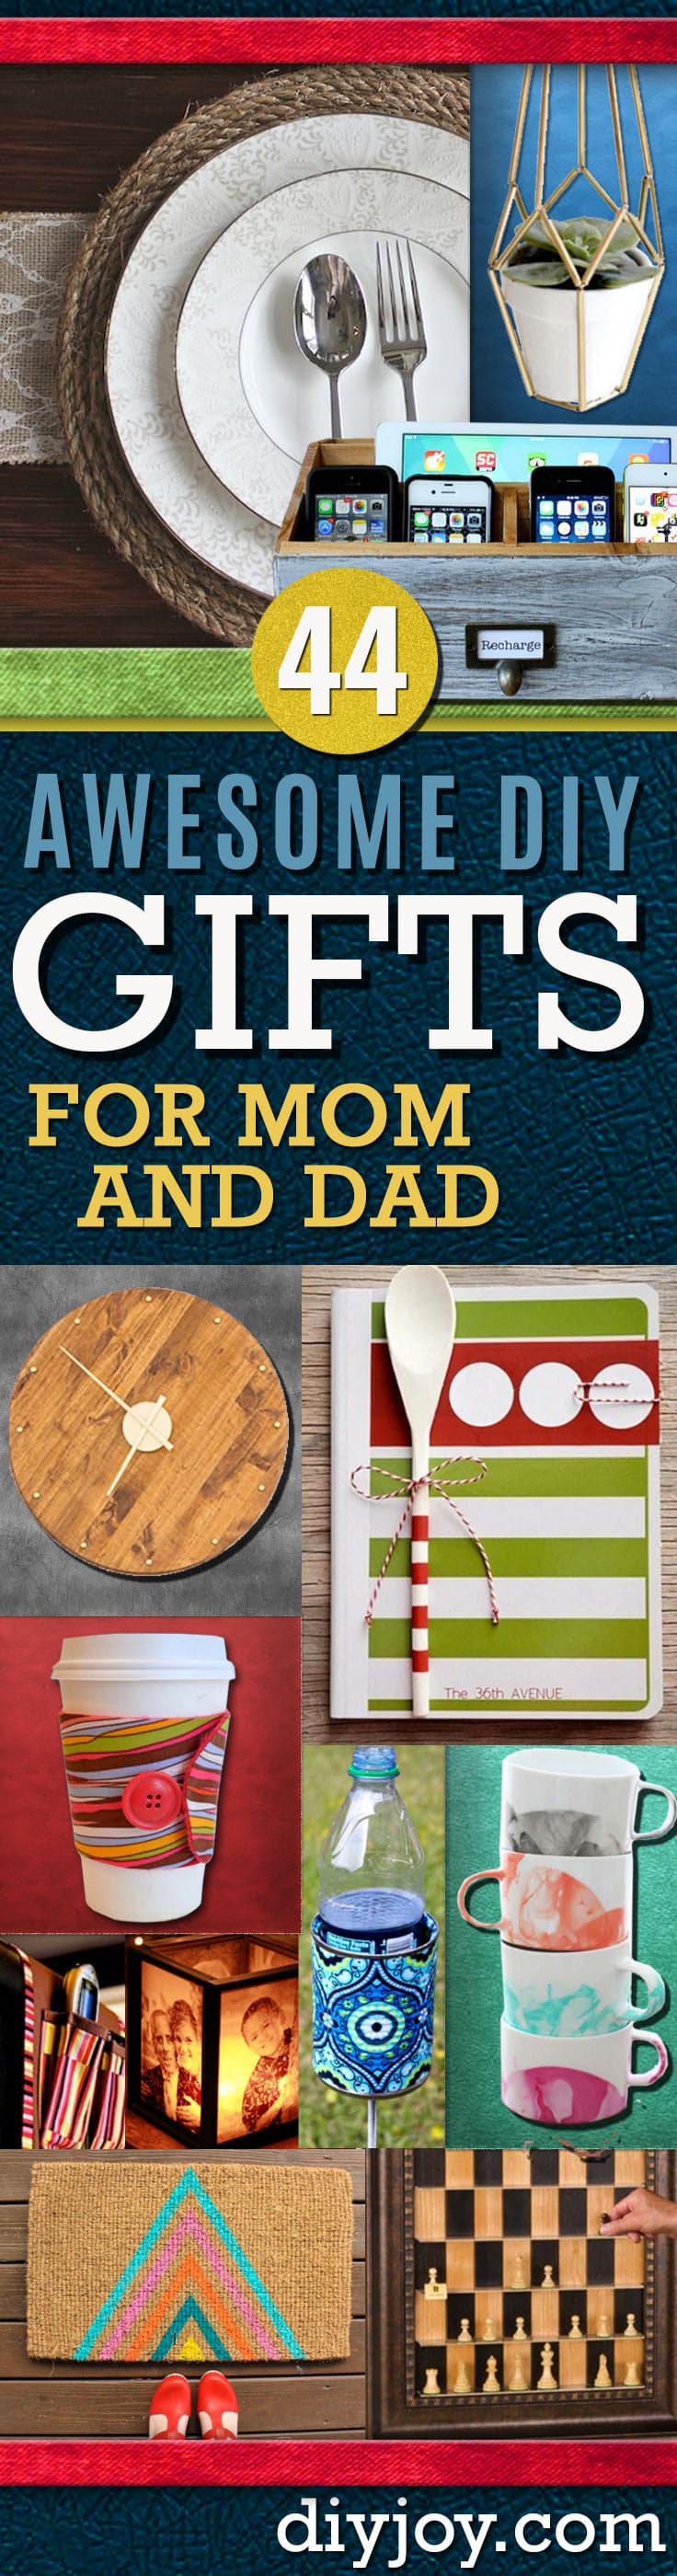 Awesome DIY Gift Ideas Mom and Dad Will Love
